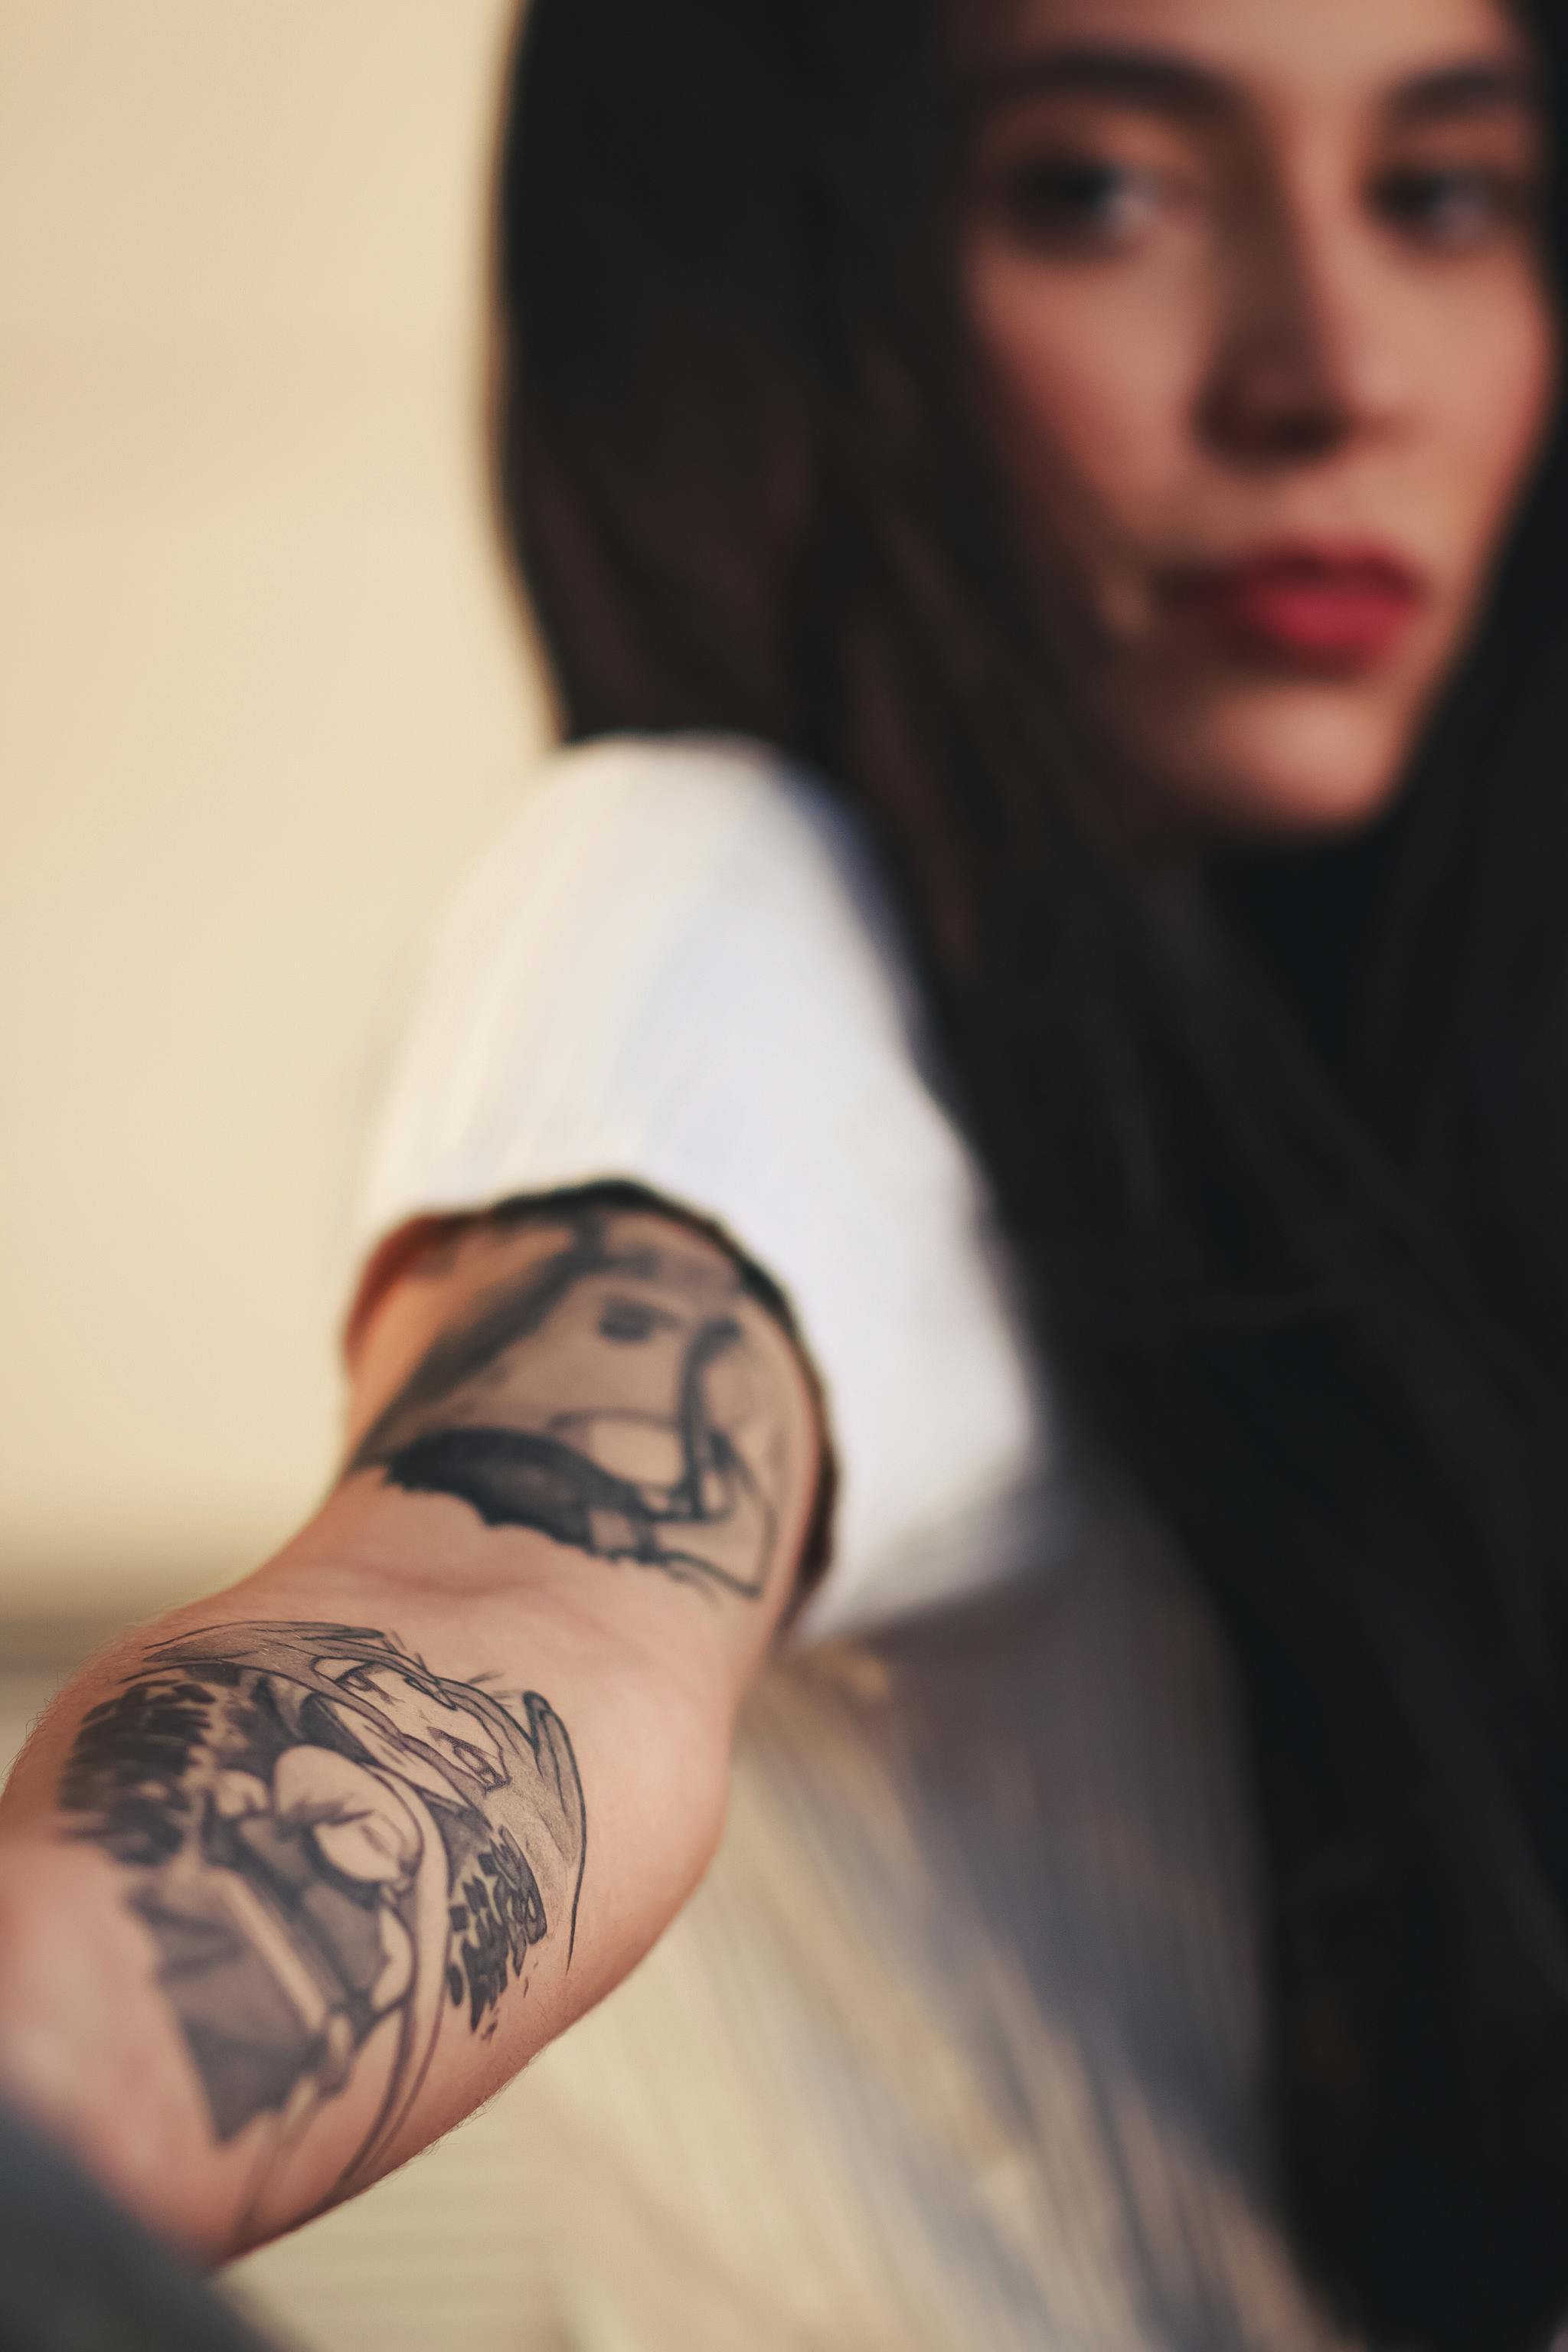 Woman With Tattoos on her Arm · Free Stock Photo